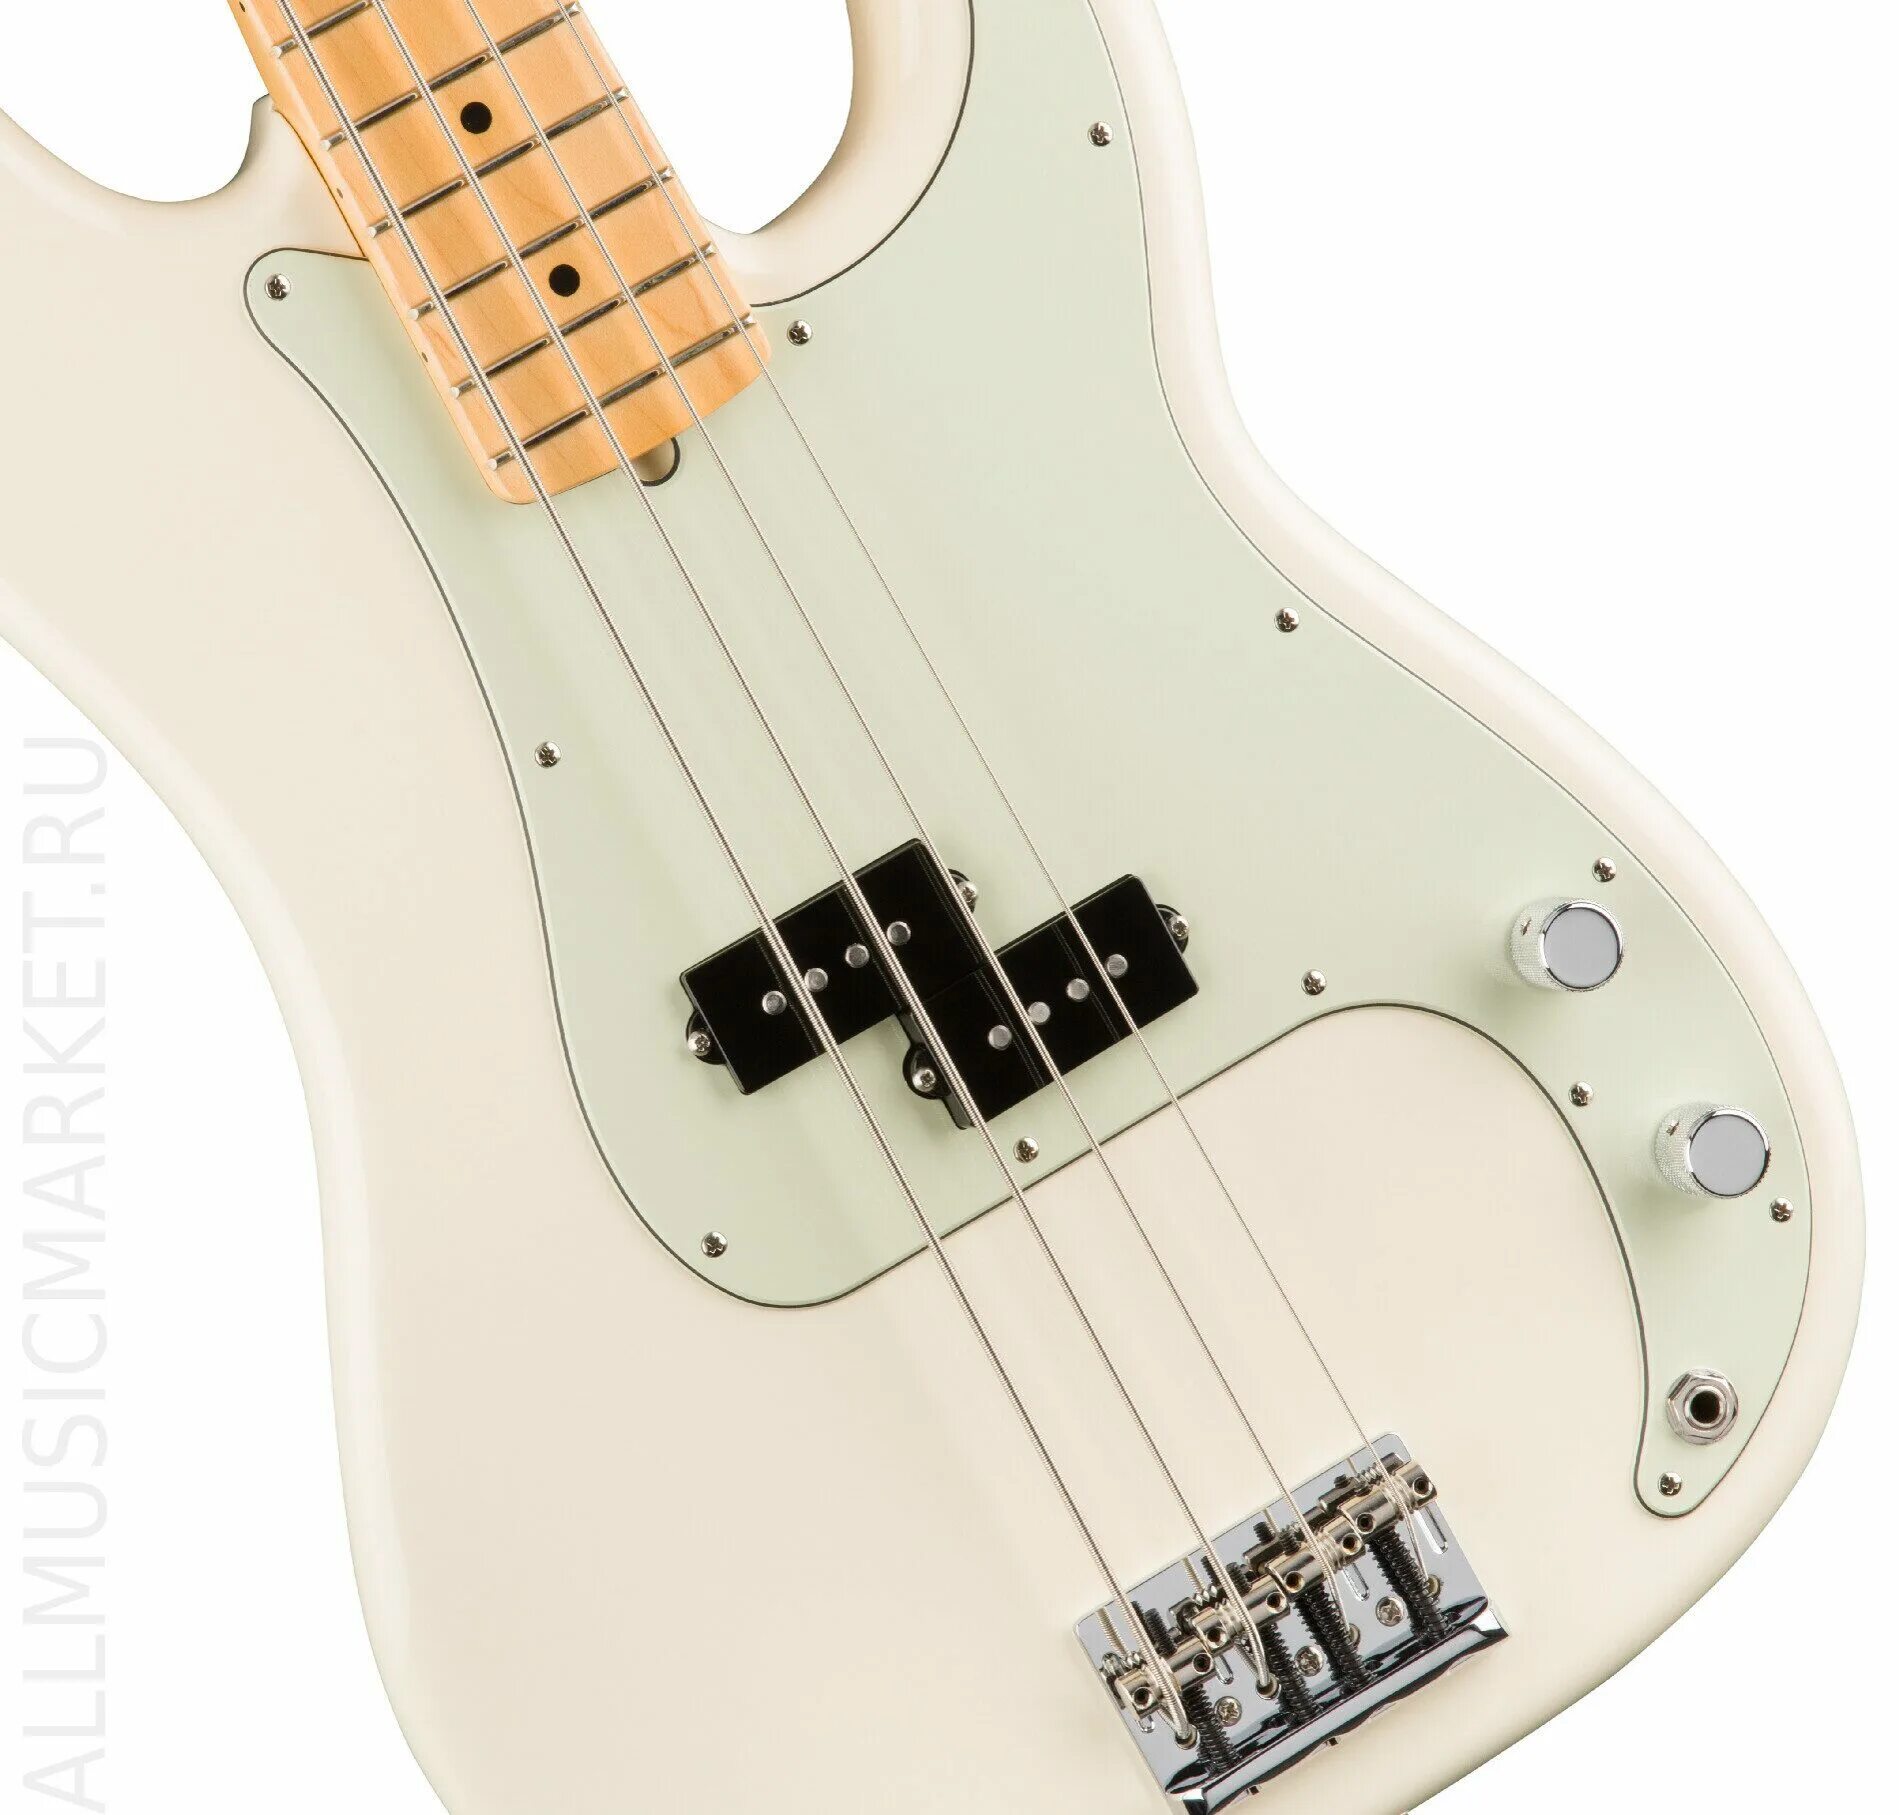 Bass white. Fender Precision Bass Olympic White. Fender Precision Bass. Fender Precision Bass белый. Fender Precision Bass v Olympic White.